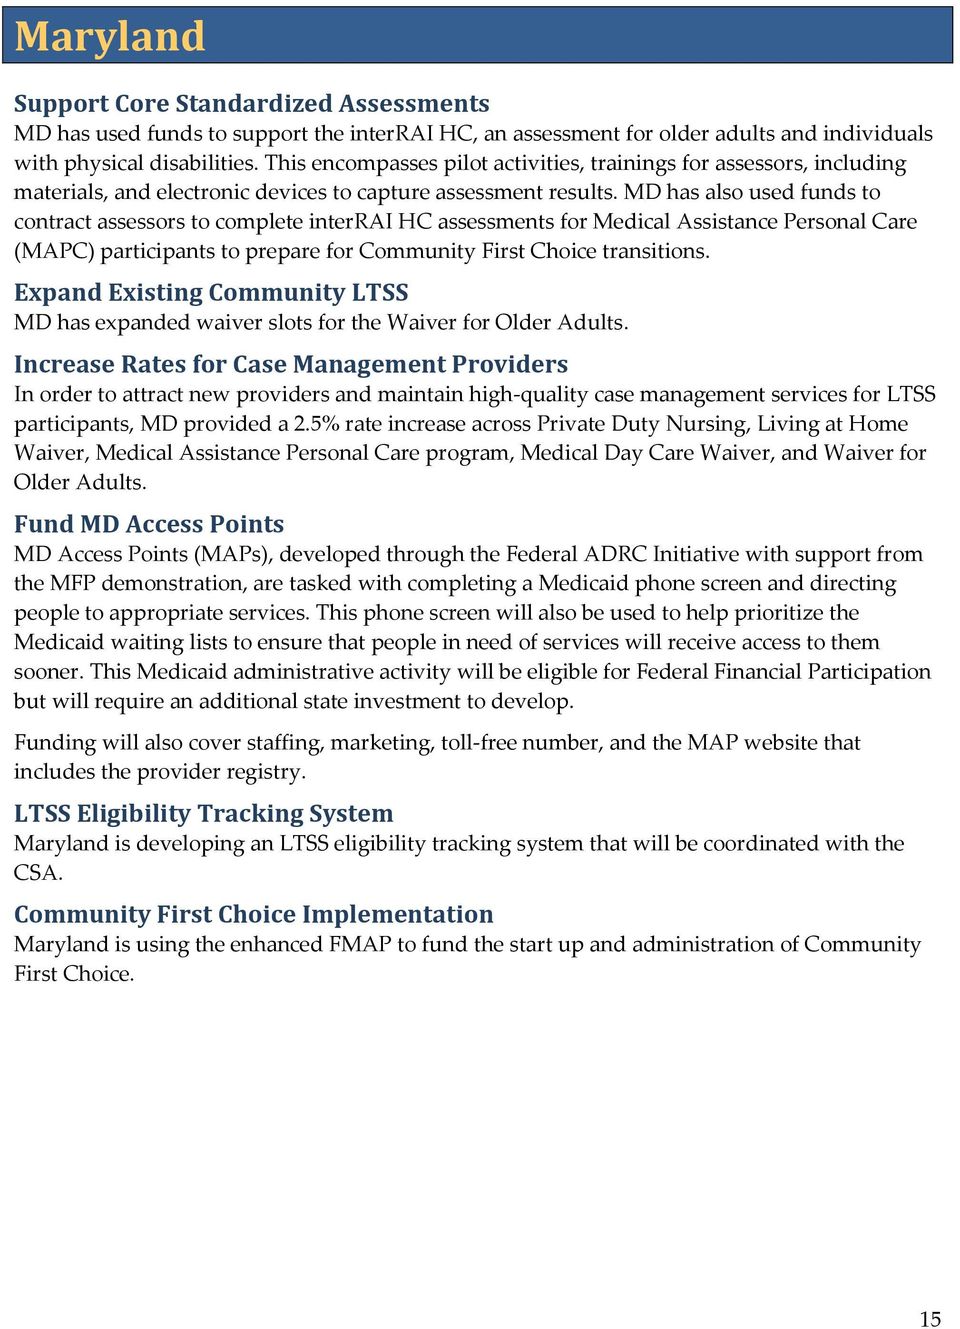 MD has also used funds to contract assessors to complete interrai HC assessments for Medical Assistance Personal Care (MAPC) participants to prepare for Community First Choice transitions.